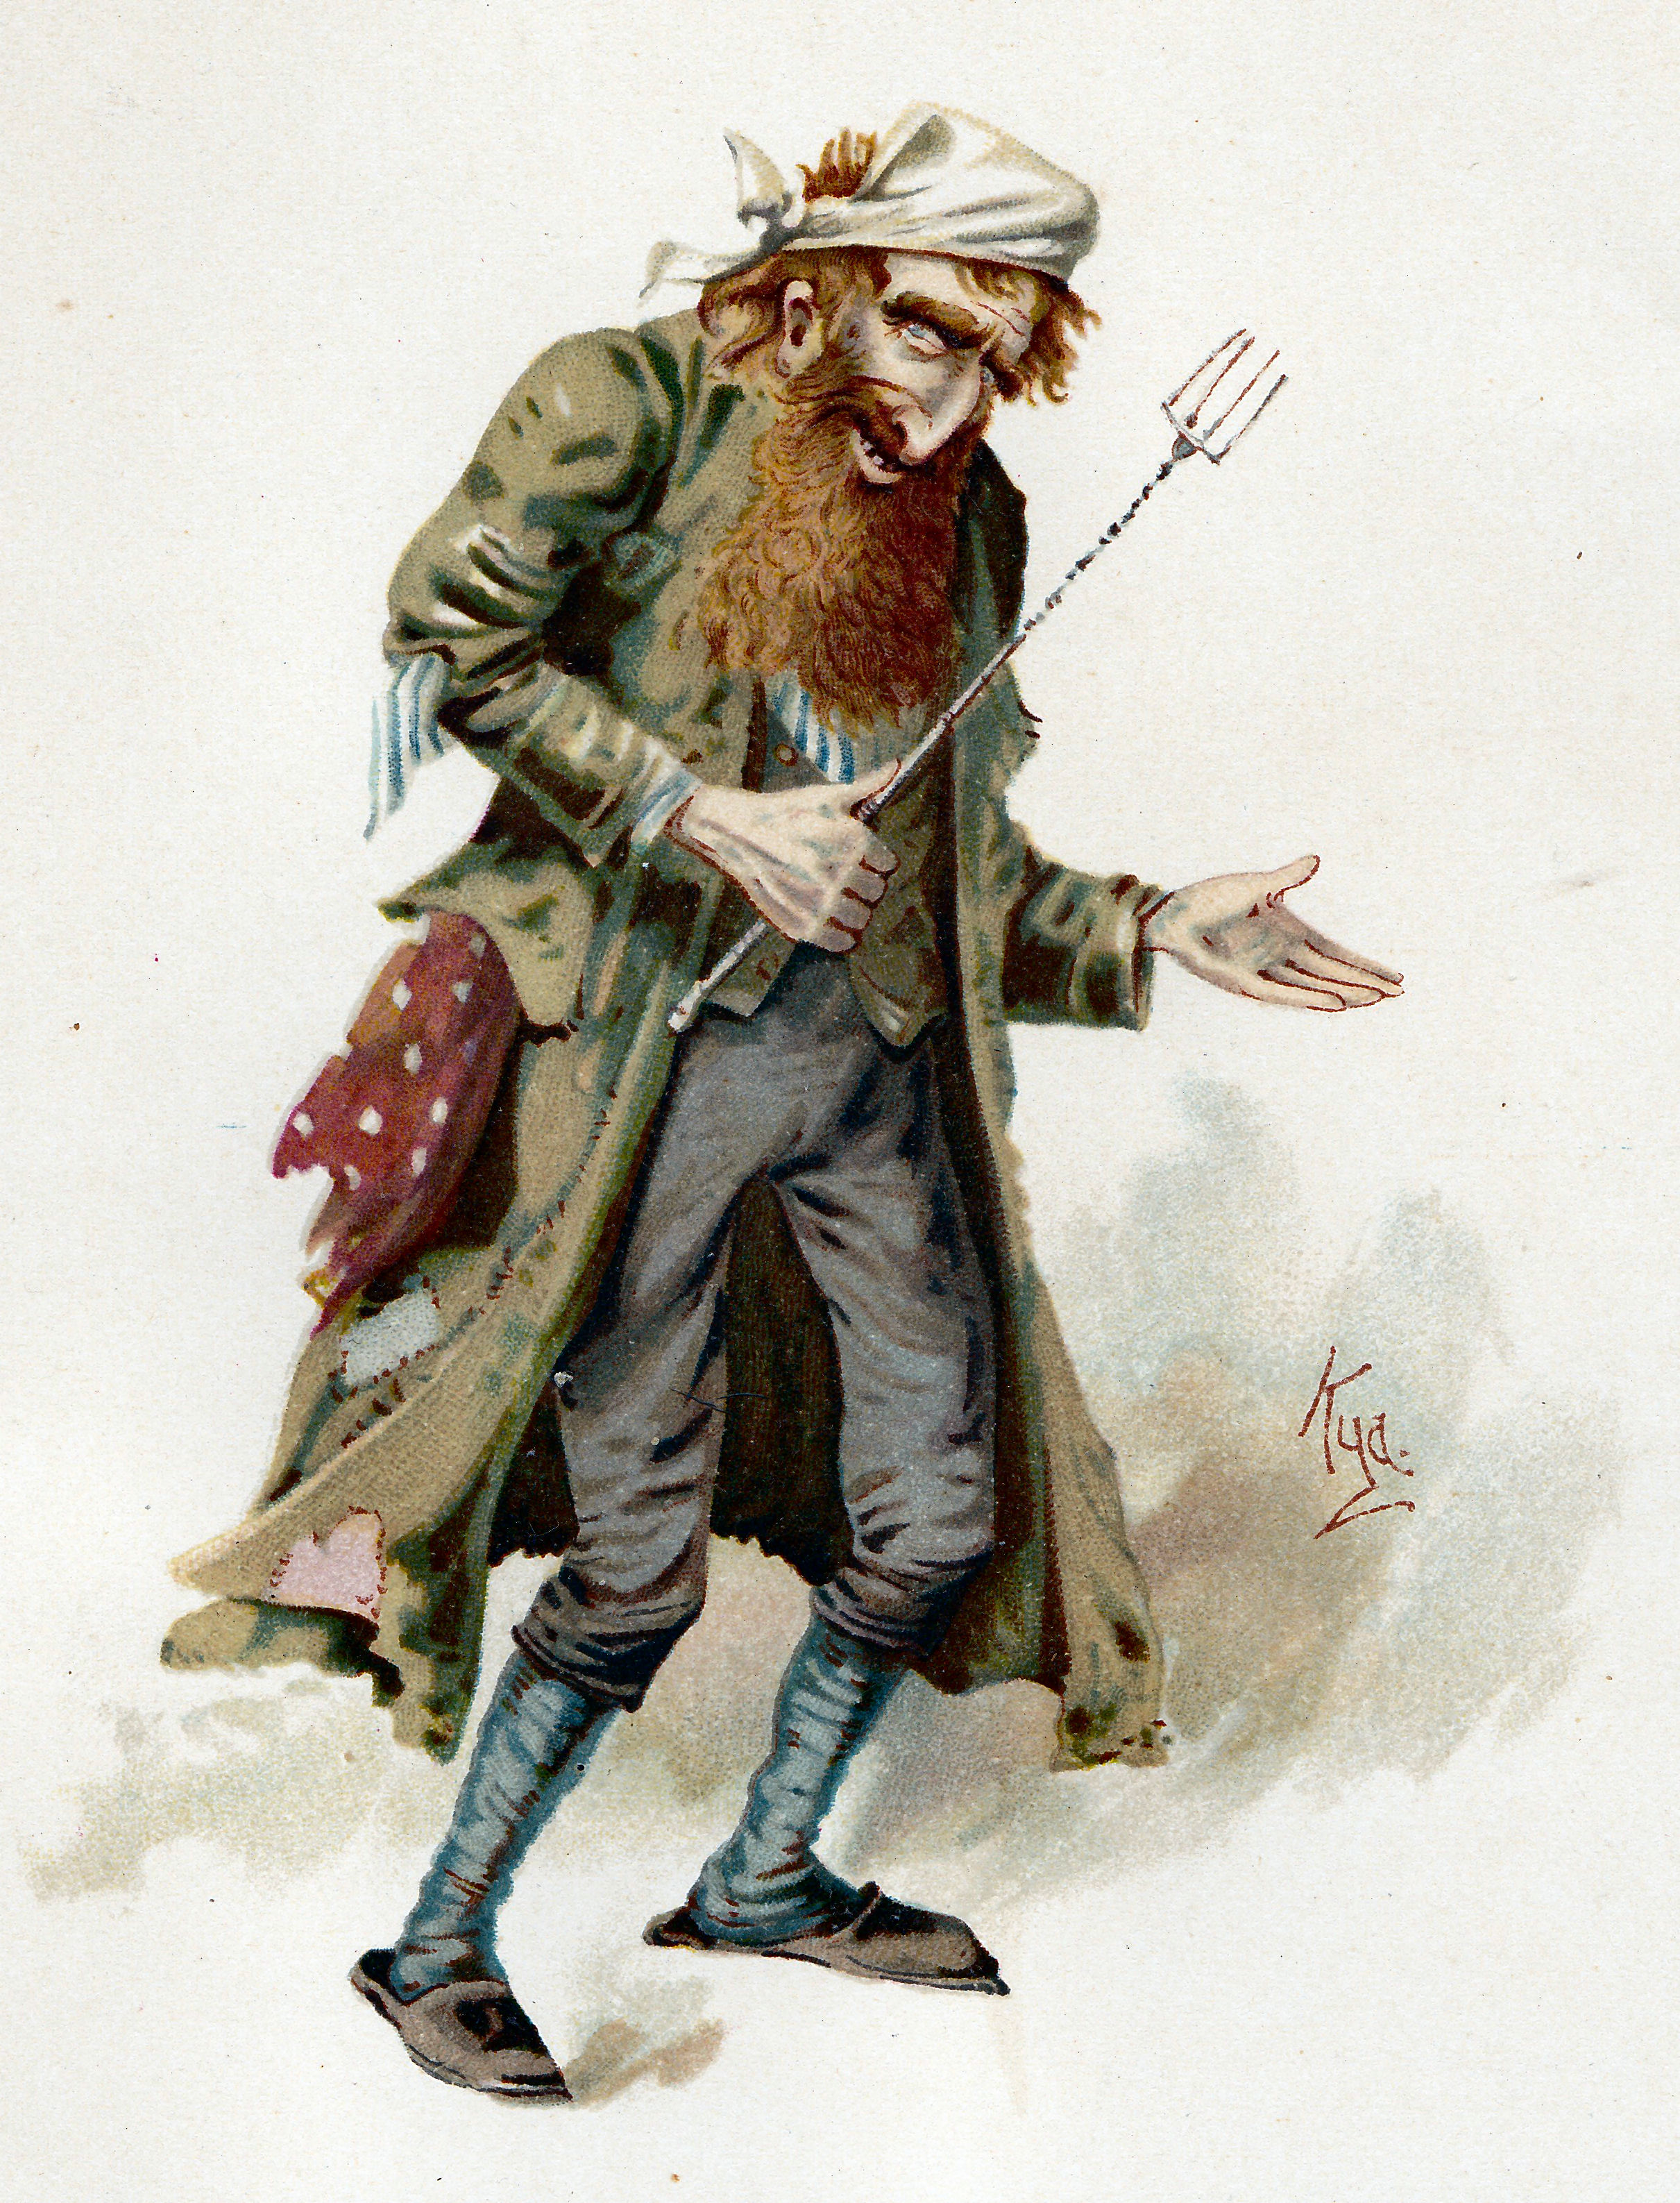 This 1889 illustration of Charles Dickens’s character Fagin suggests a more negative association with red hair